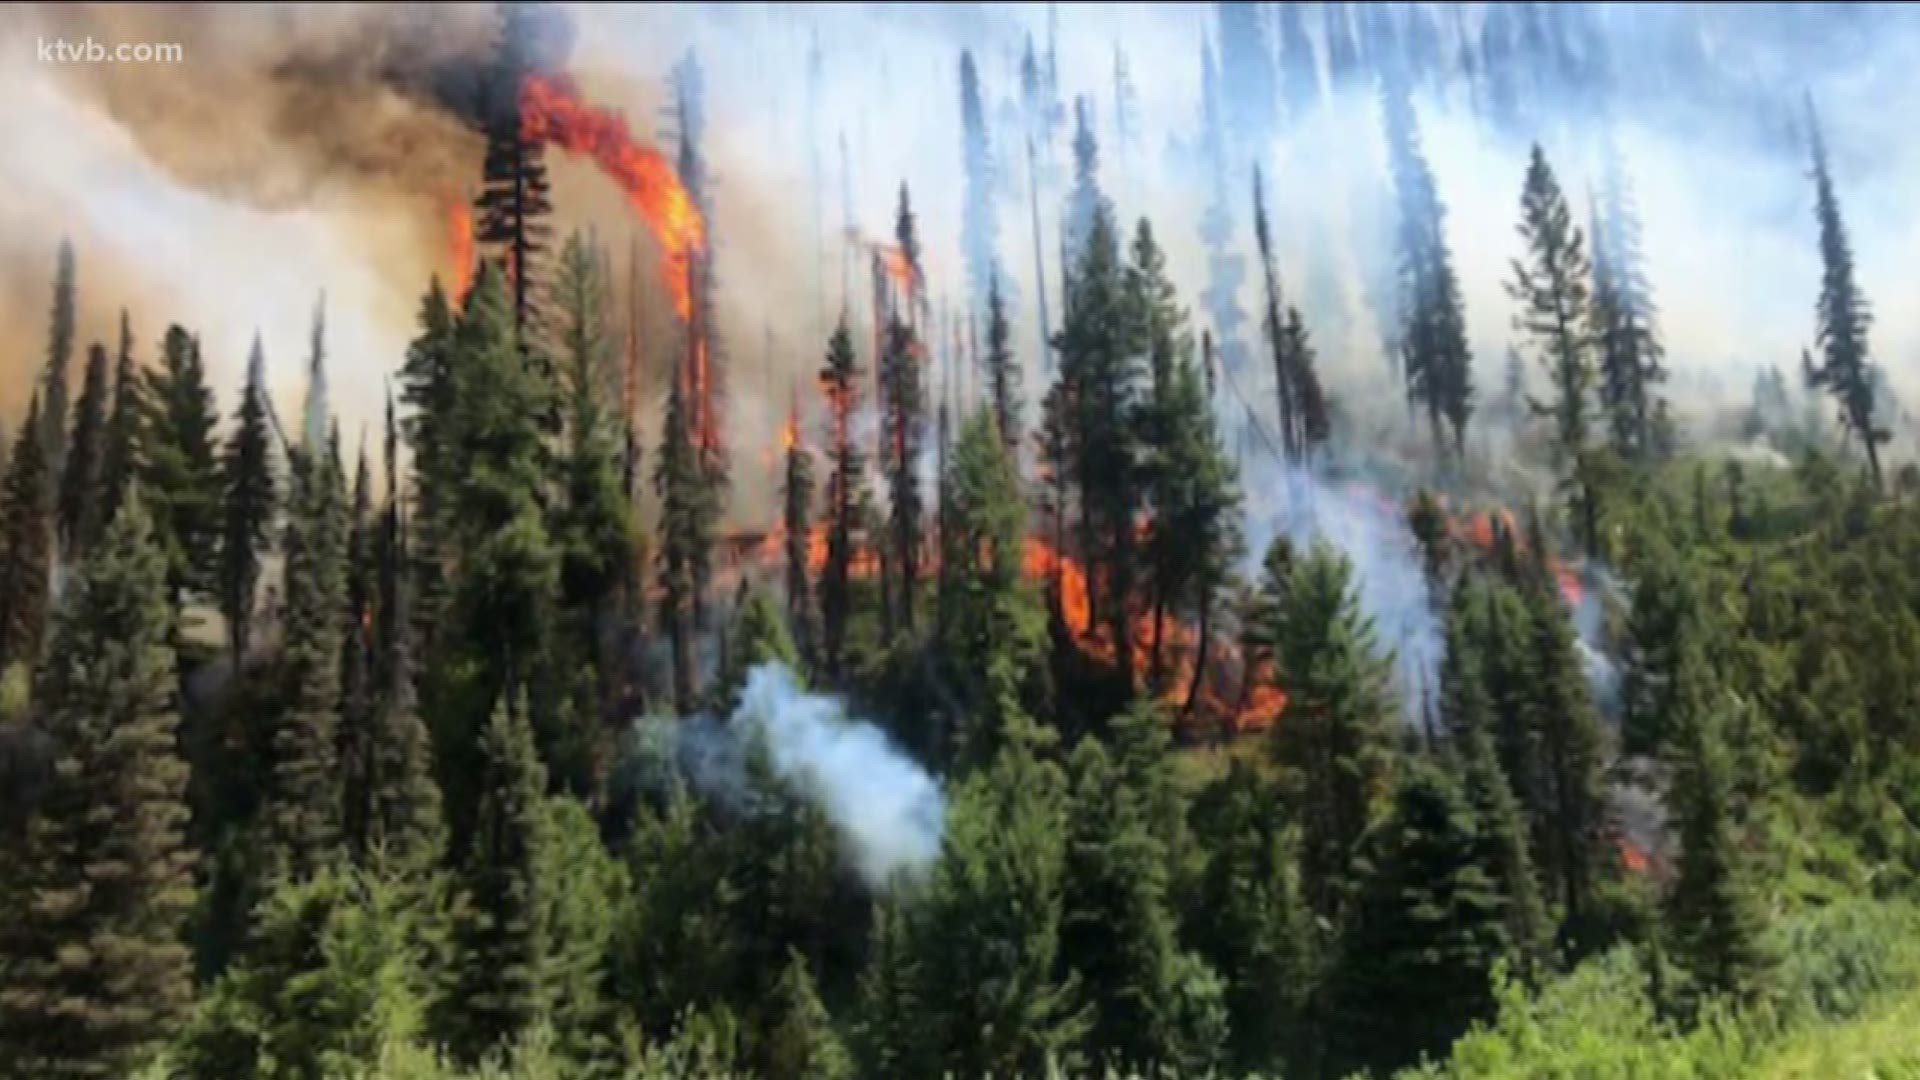 Wildland firefighters throughout southern and central Idaho are bracing for severe fire weather this week.